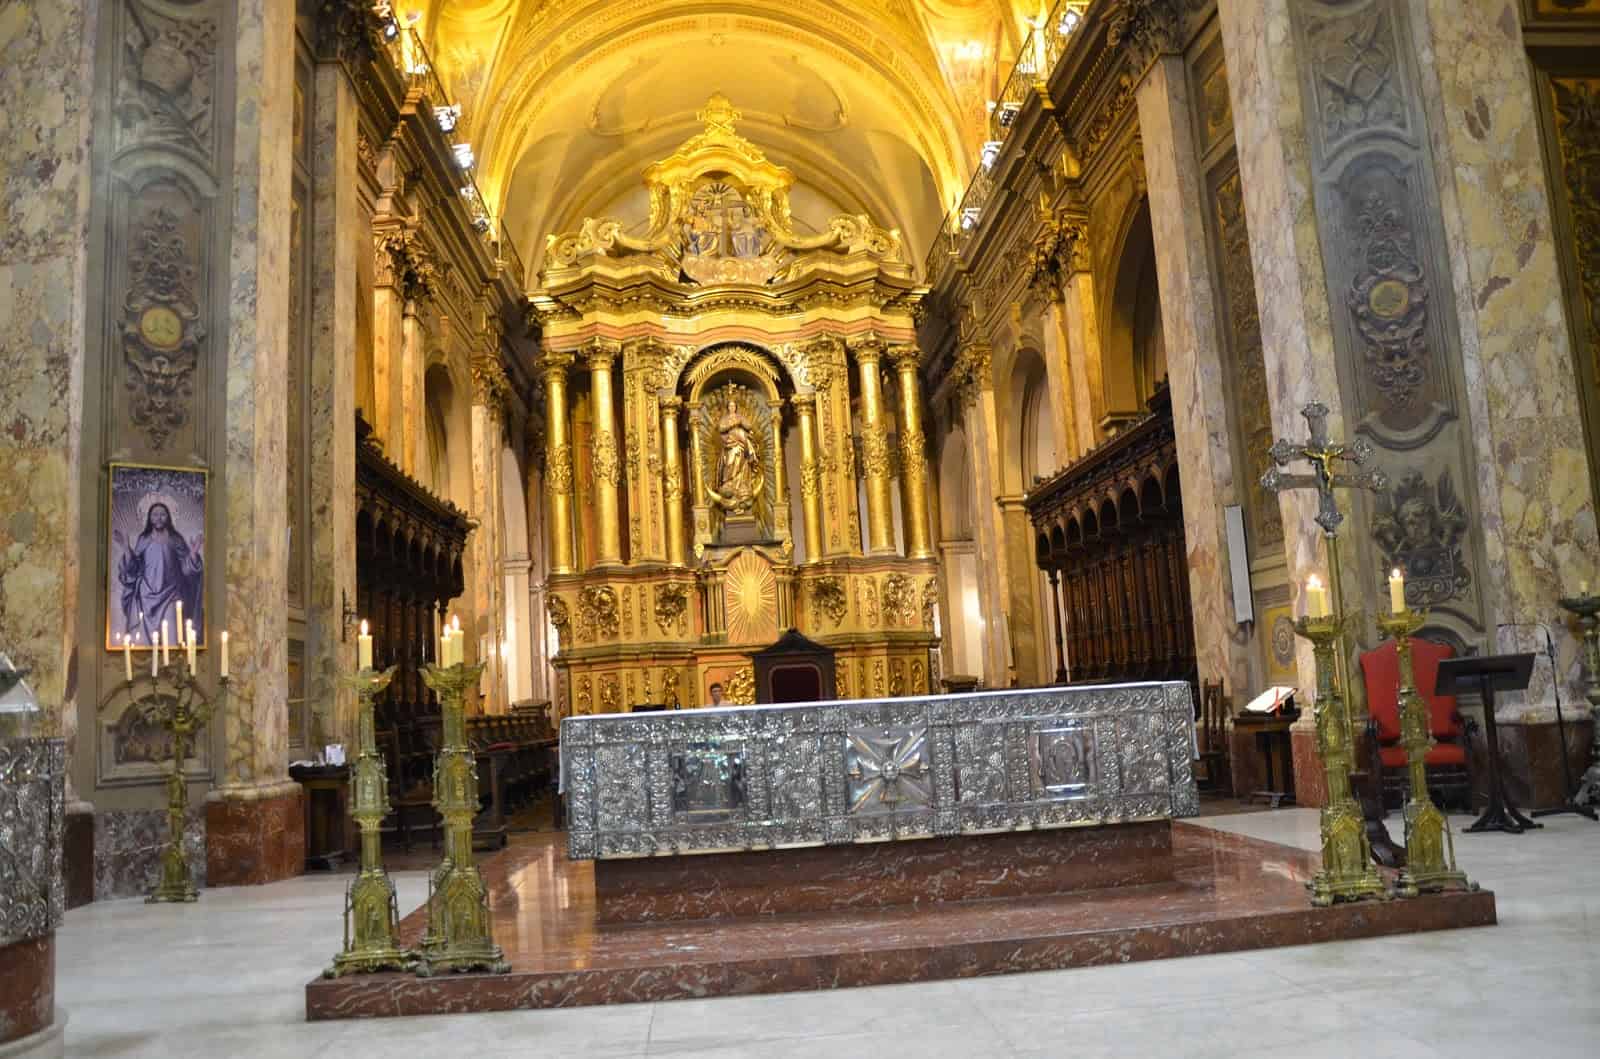 Altar of the Metropolitan Cathedral